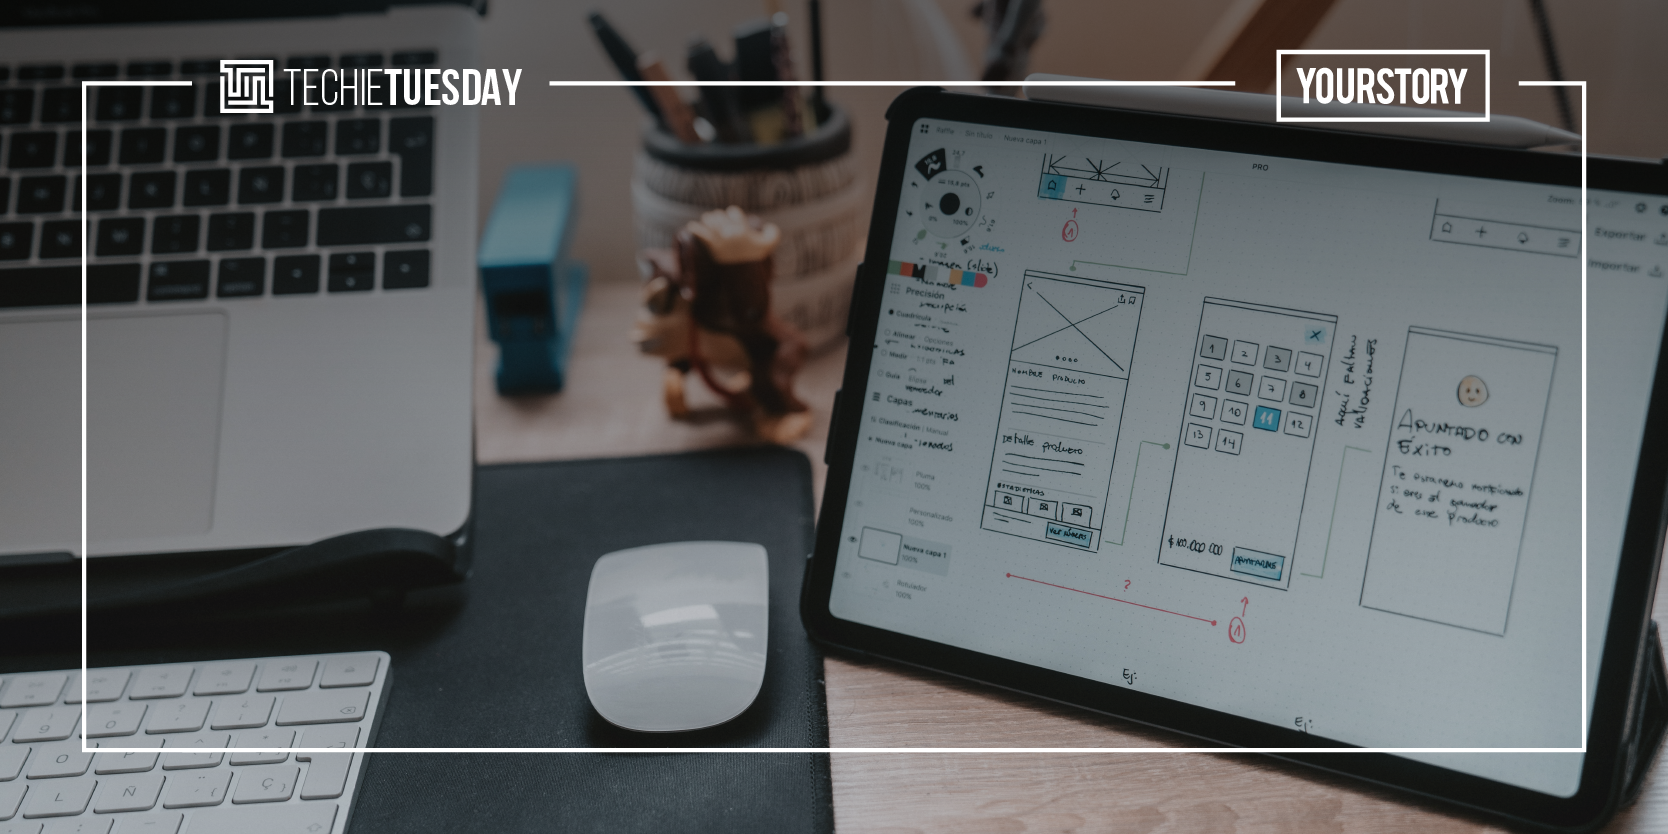 [Techie Tuesday] How UI/UX is changing the digital commerce landscape

